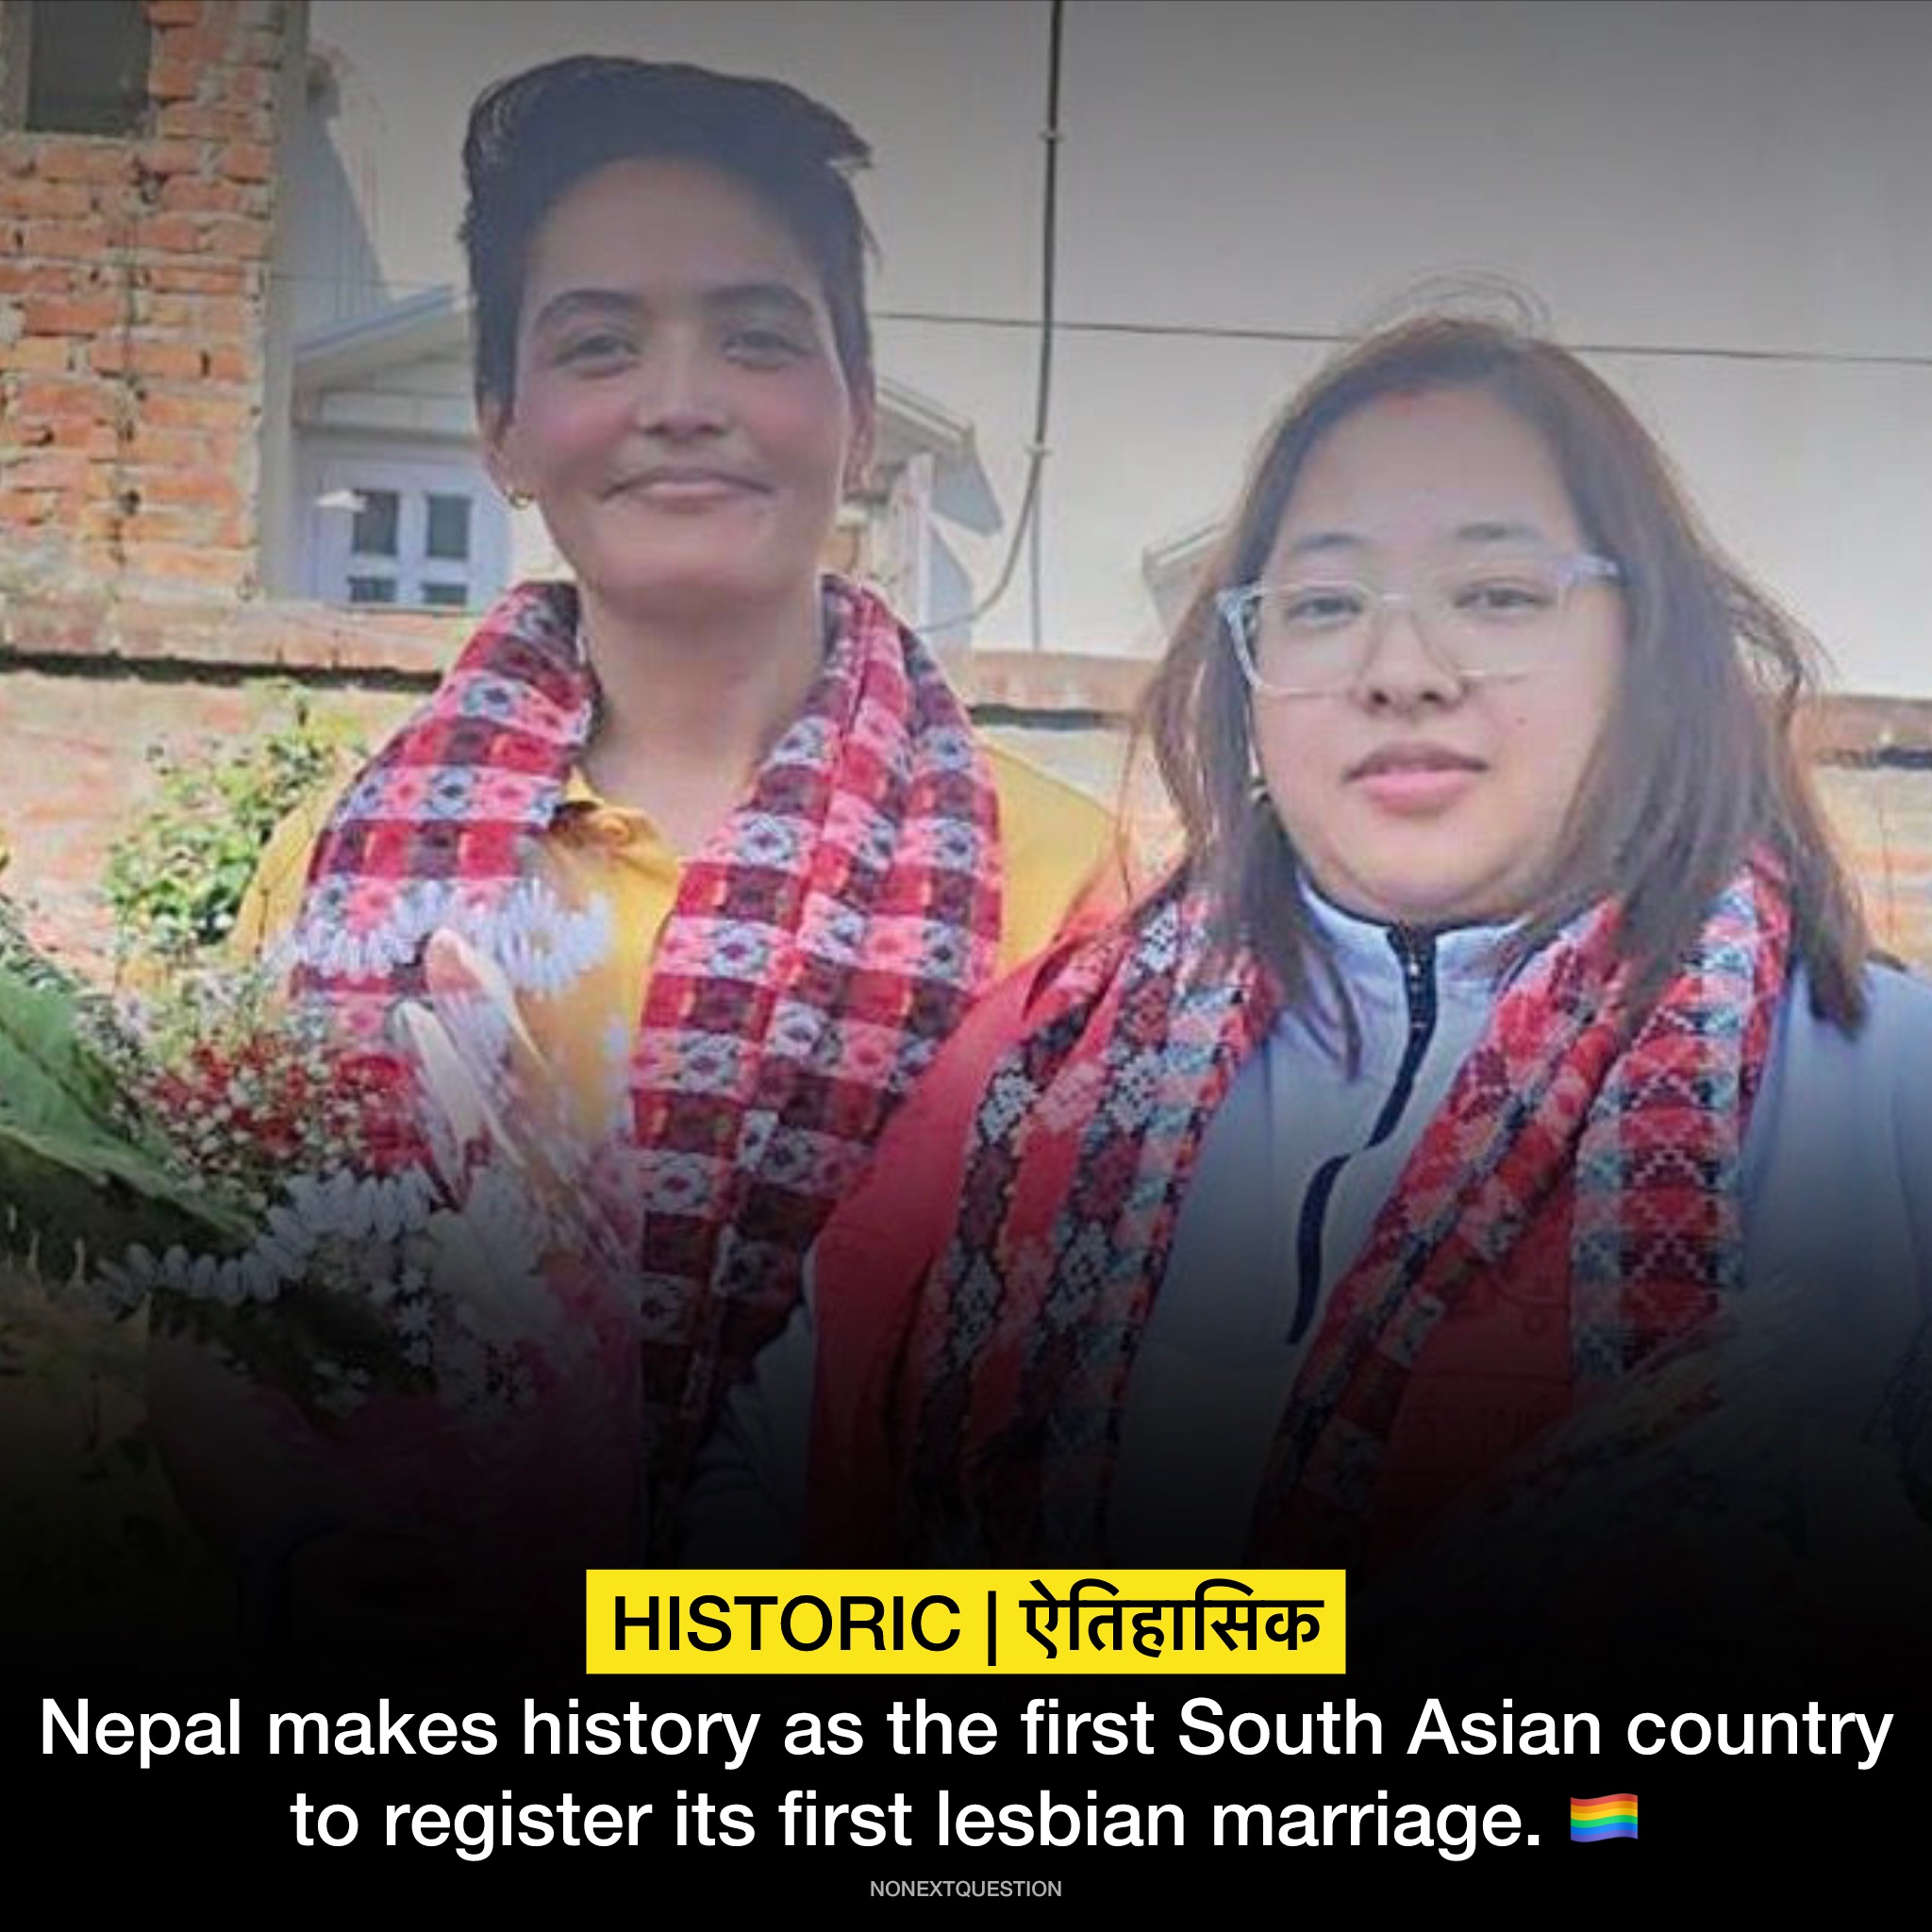 Nepal makes history as the first South Asian country to register its first lesbian marriage.